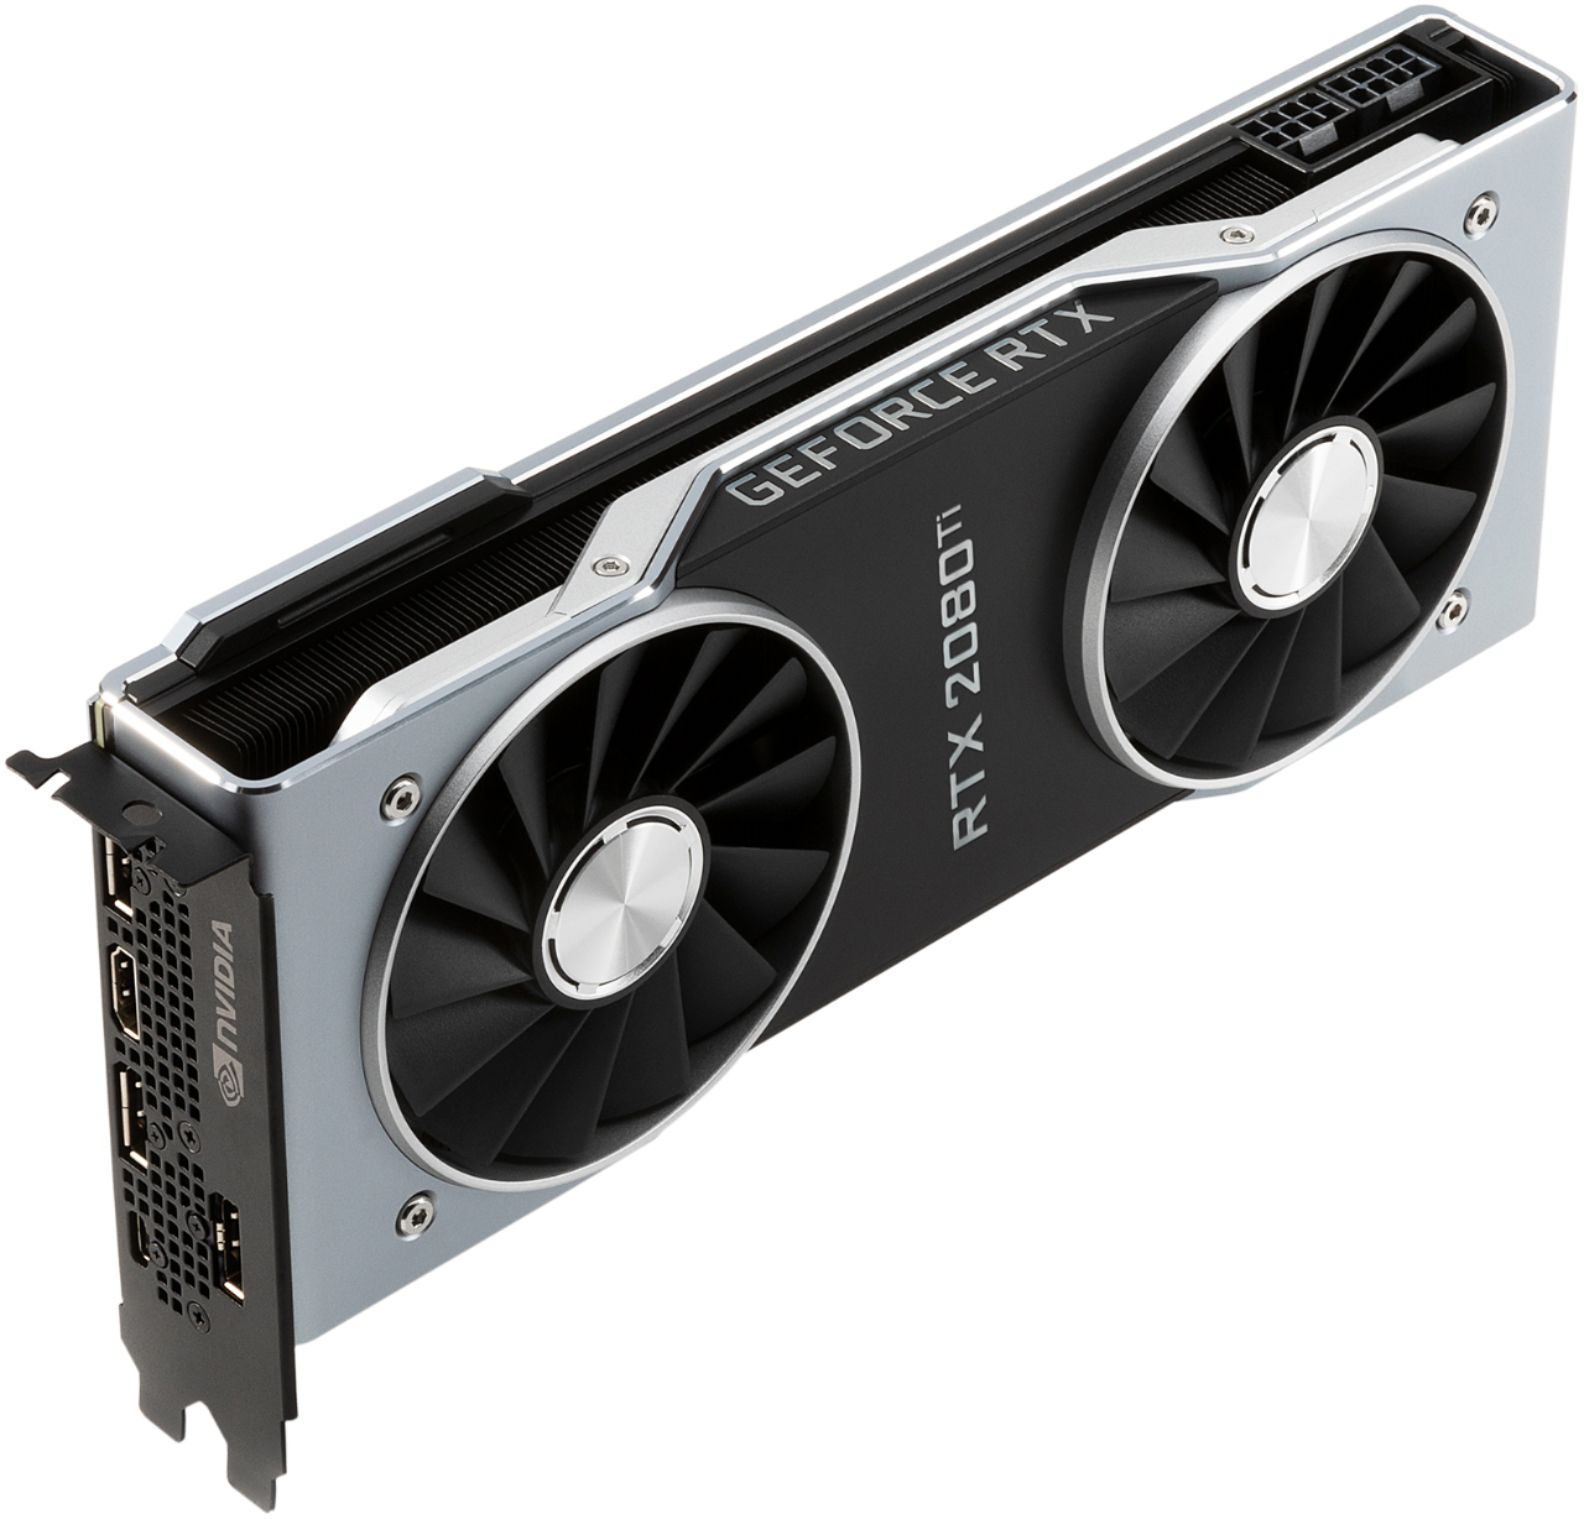 Buy: NVIDIA GeForce RTX 2080 Ti Founders Edition 11GB GDDR6 PCI Express 3.0 Graphics Card 9001G1502530000